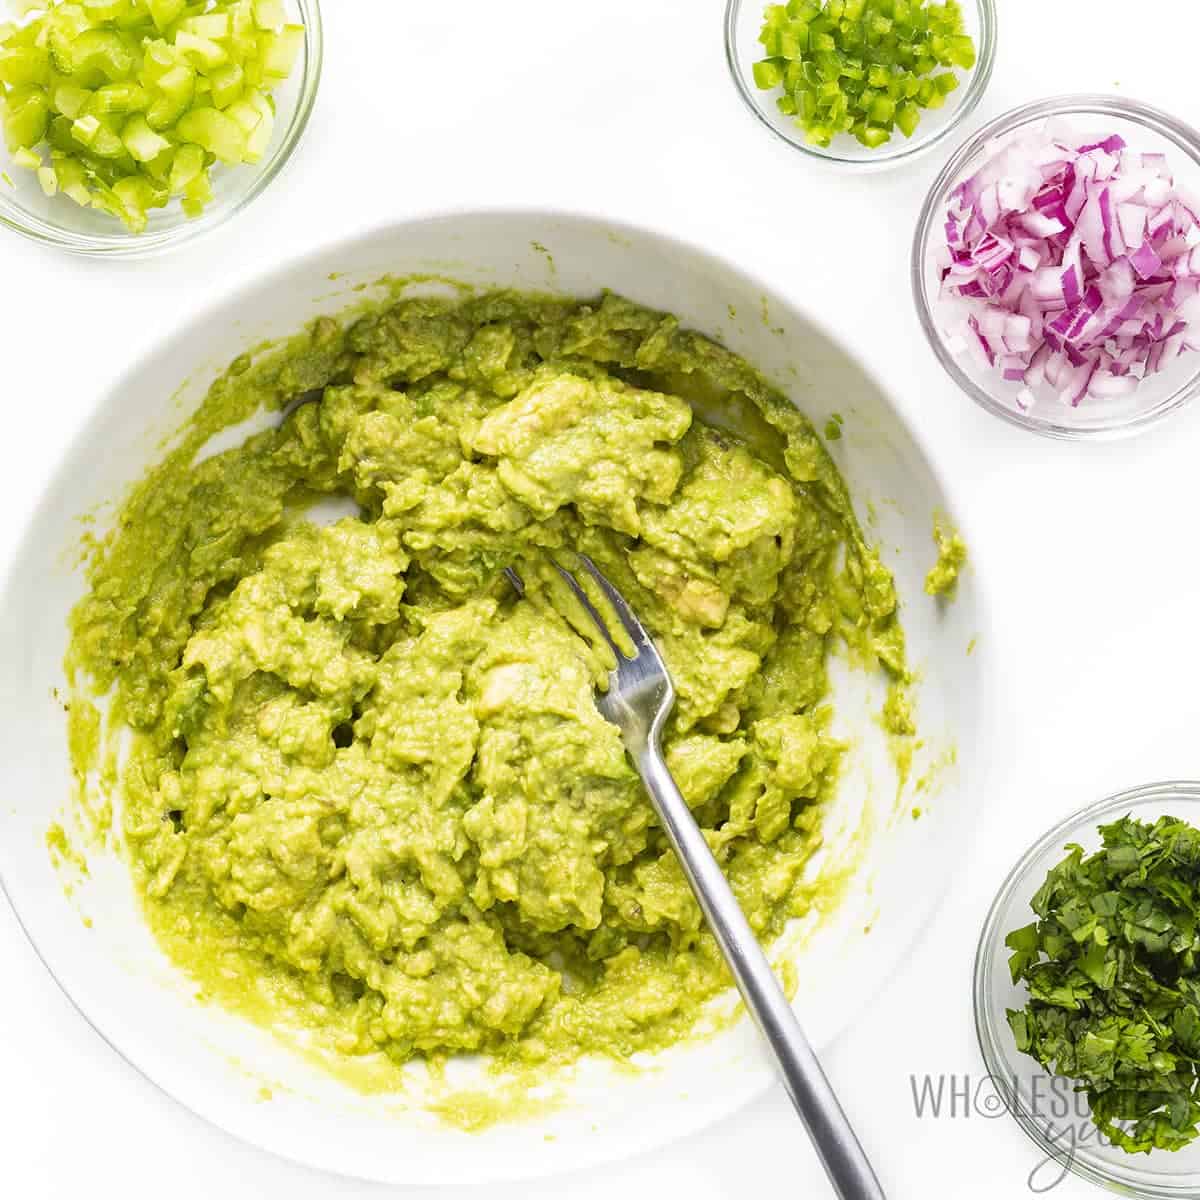 Set aside the mashed avocado and other avocado egg salad toppings.